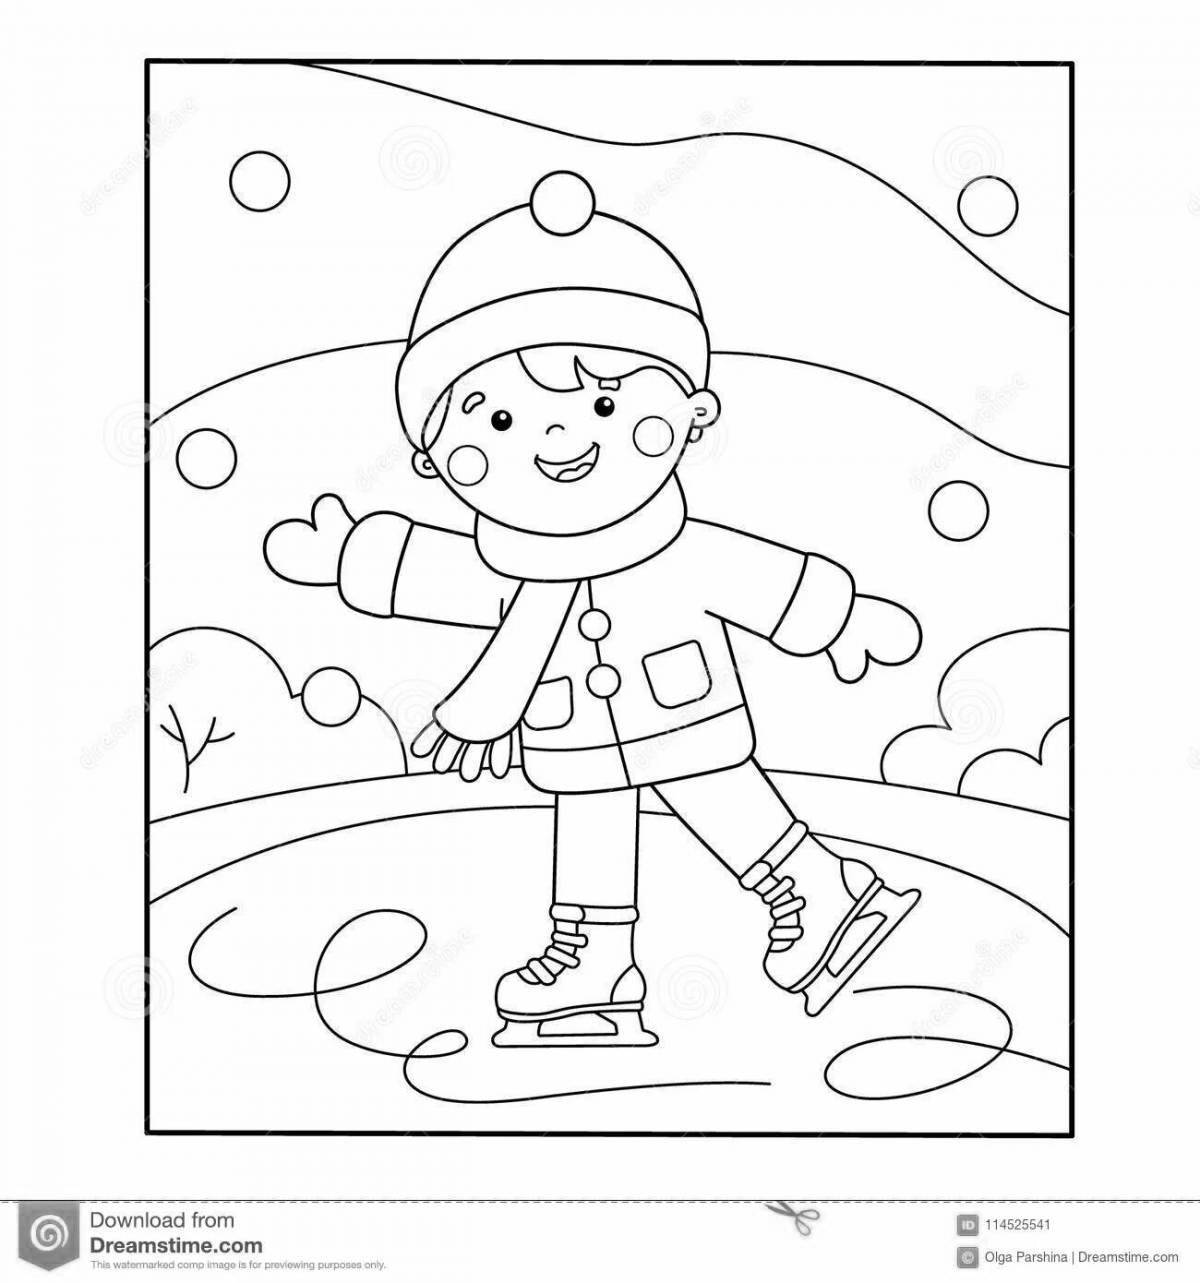 Great sports coloring book for preschoolers